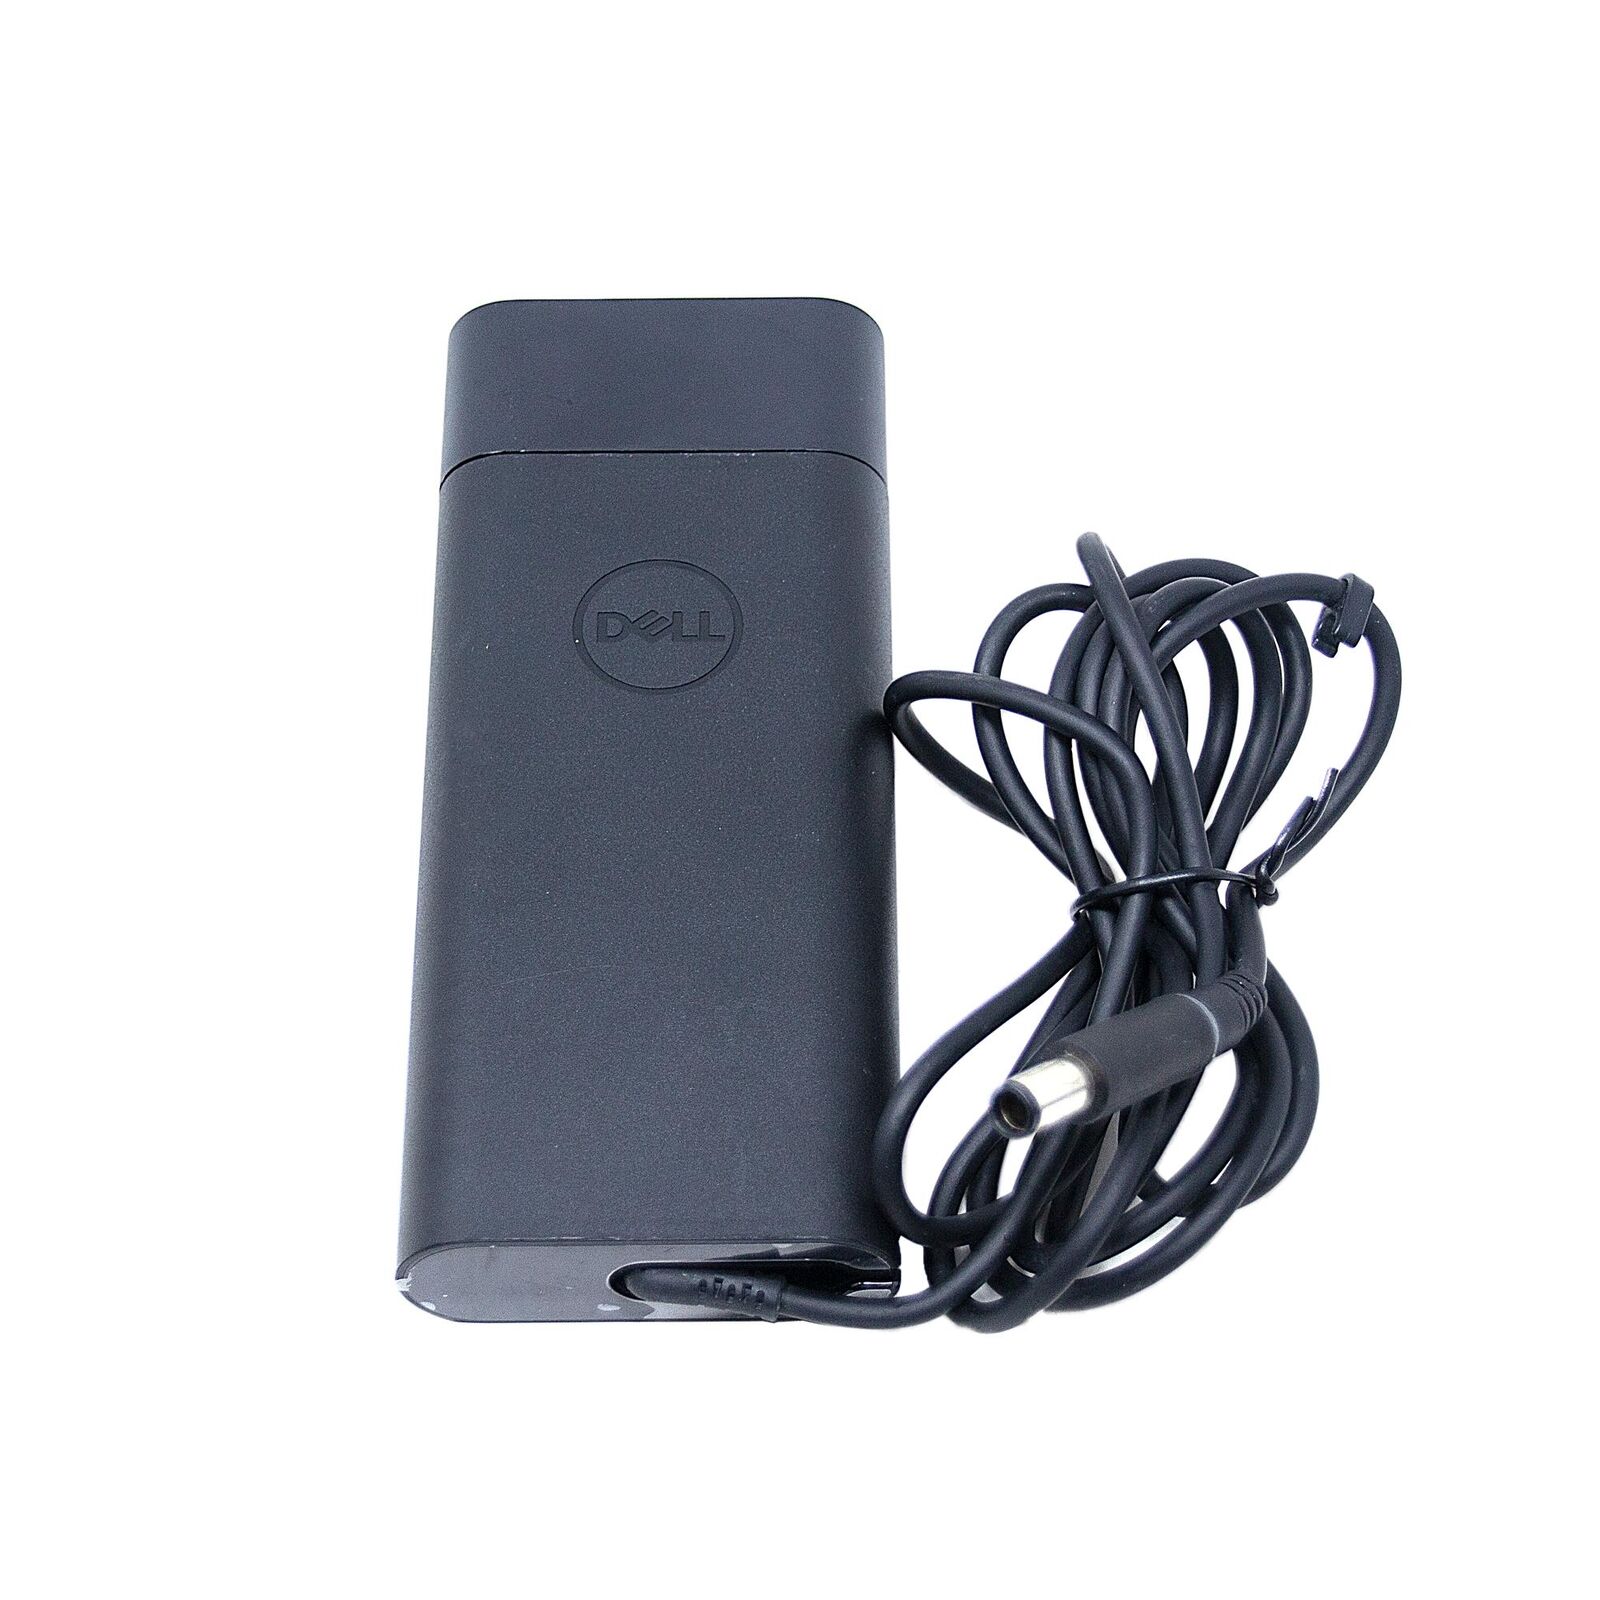 DELL ADP-90AH EA 19.5V 4.62A 90W Genuine Original AC Power Adapter Charger